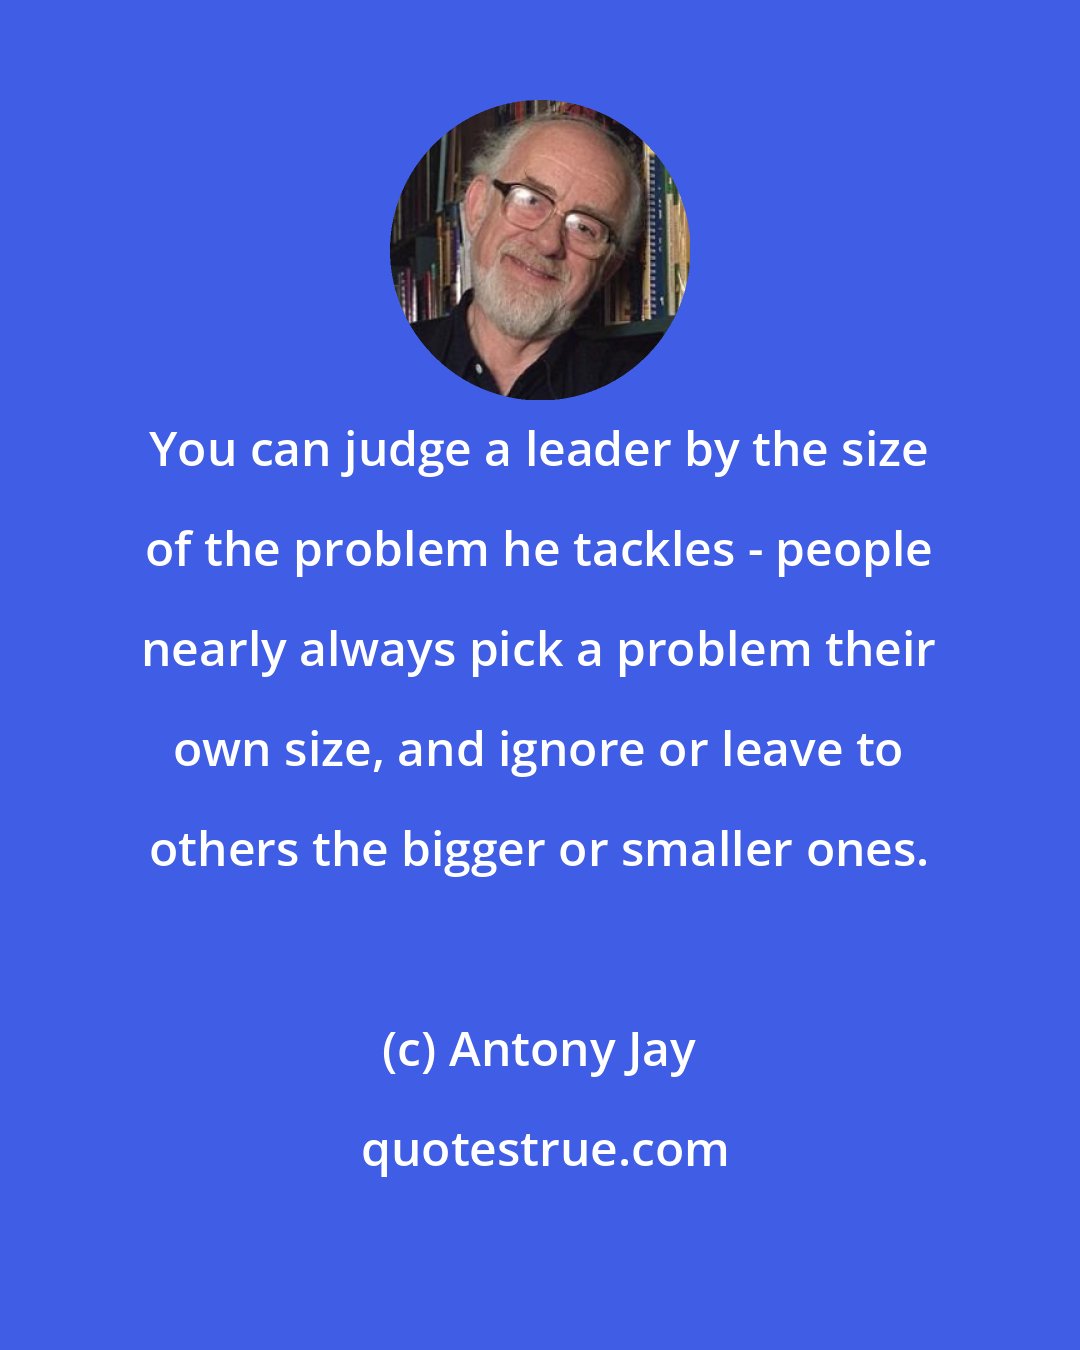 Antony Jay: You can judge a leader by the size of the problem he tackles - people nearly always pick a problem their own size, and ignore or leave to others the bigger or smaller ones.